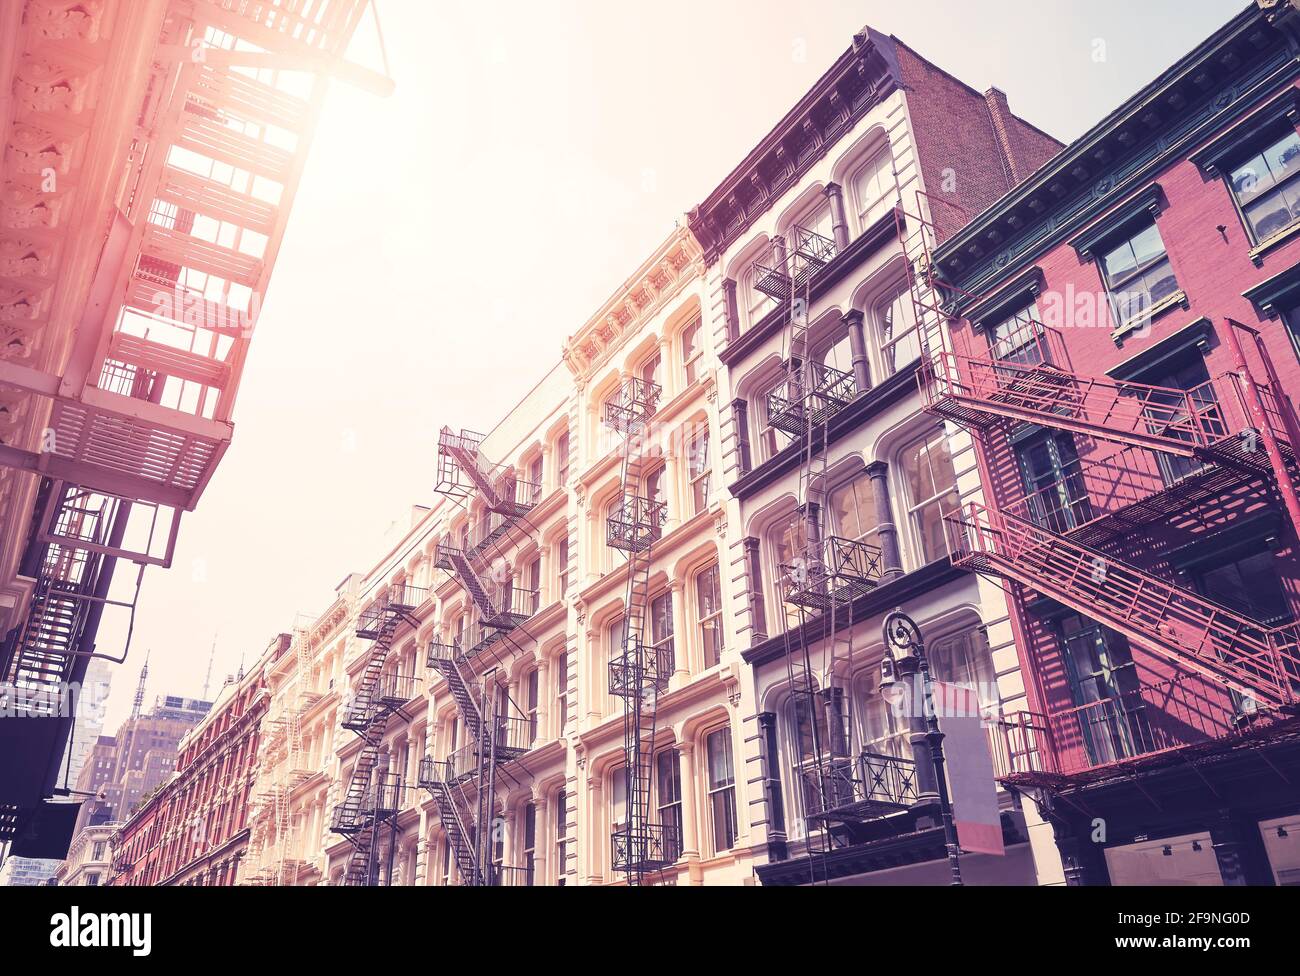 New York cityscape with old buildings with fire escapes, color toning applied, USA. Stock Photo